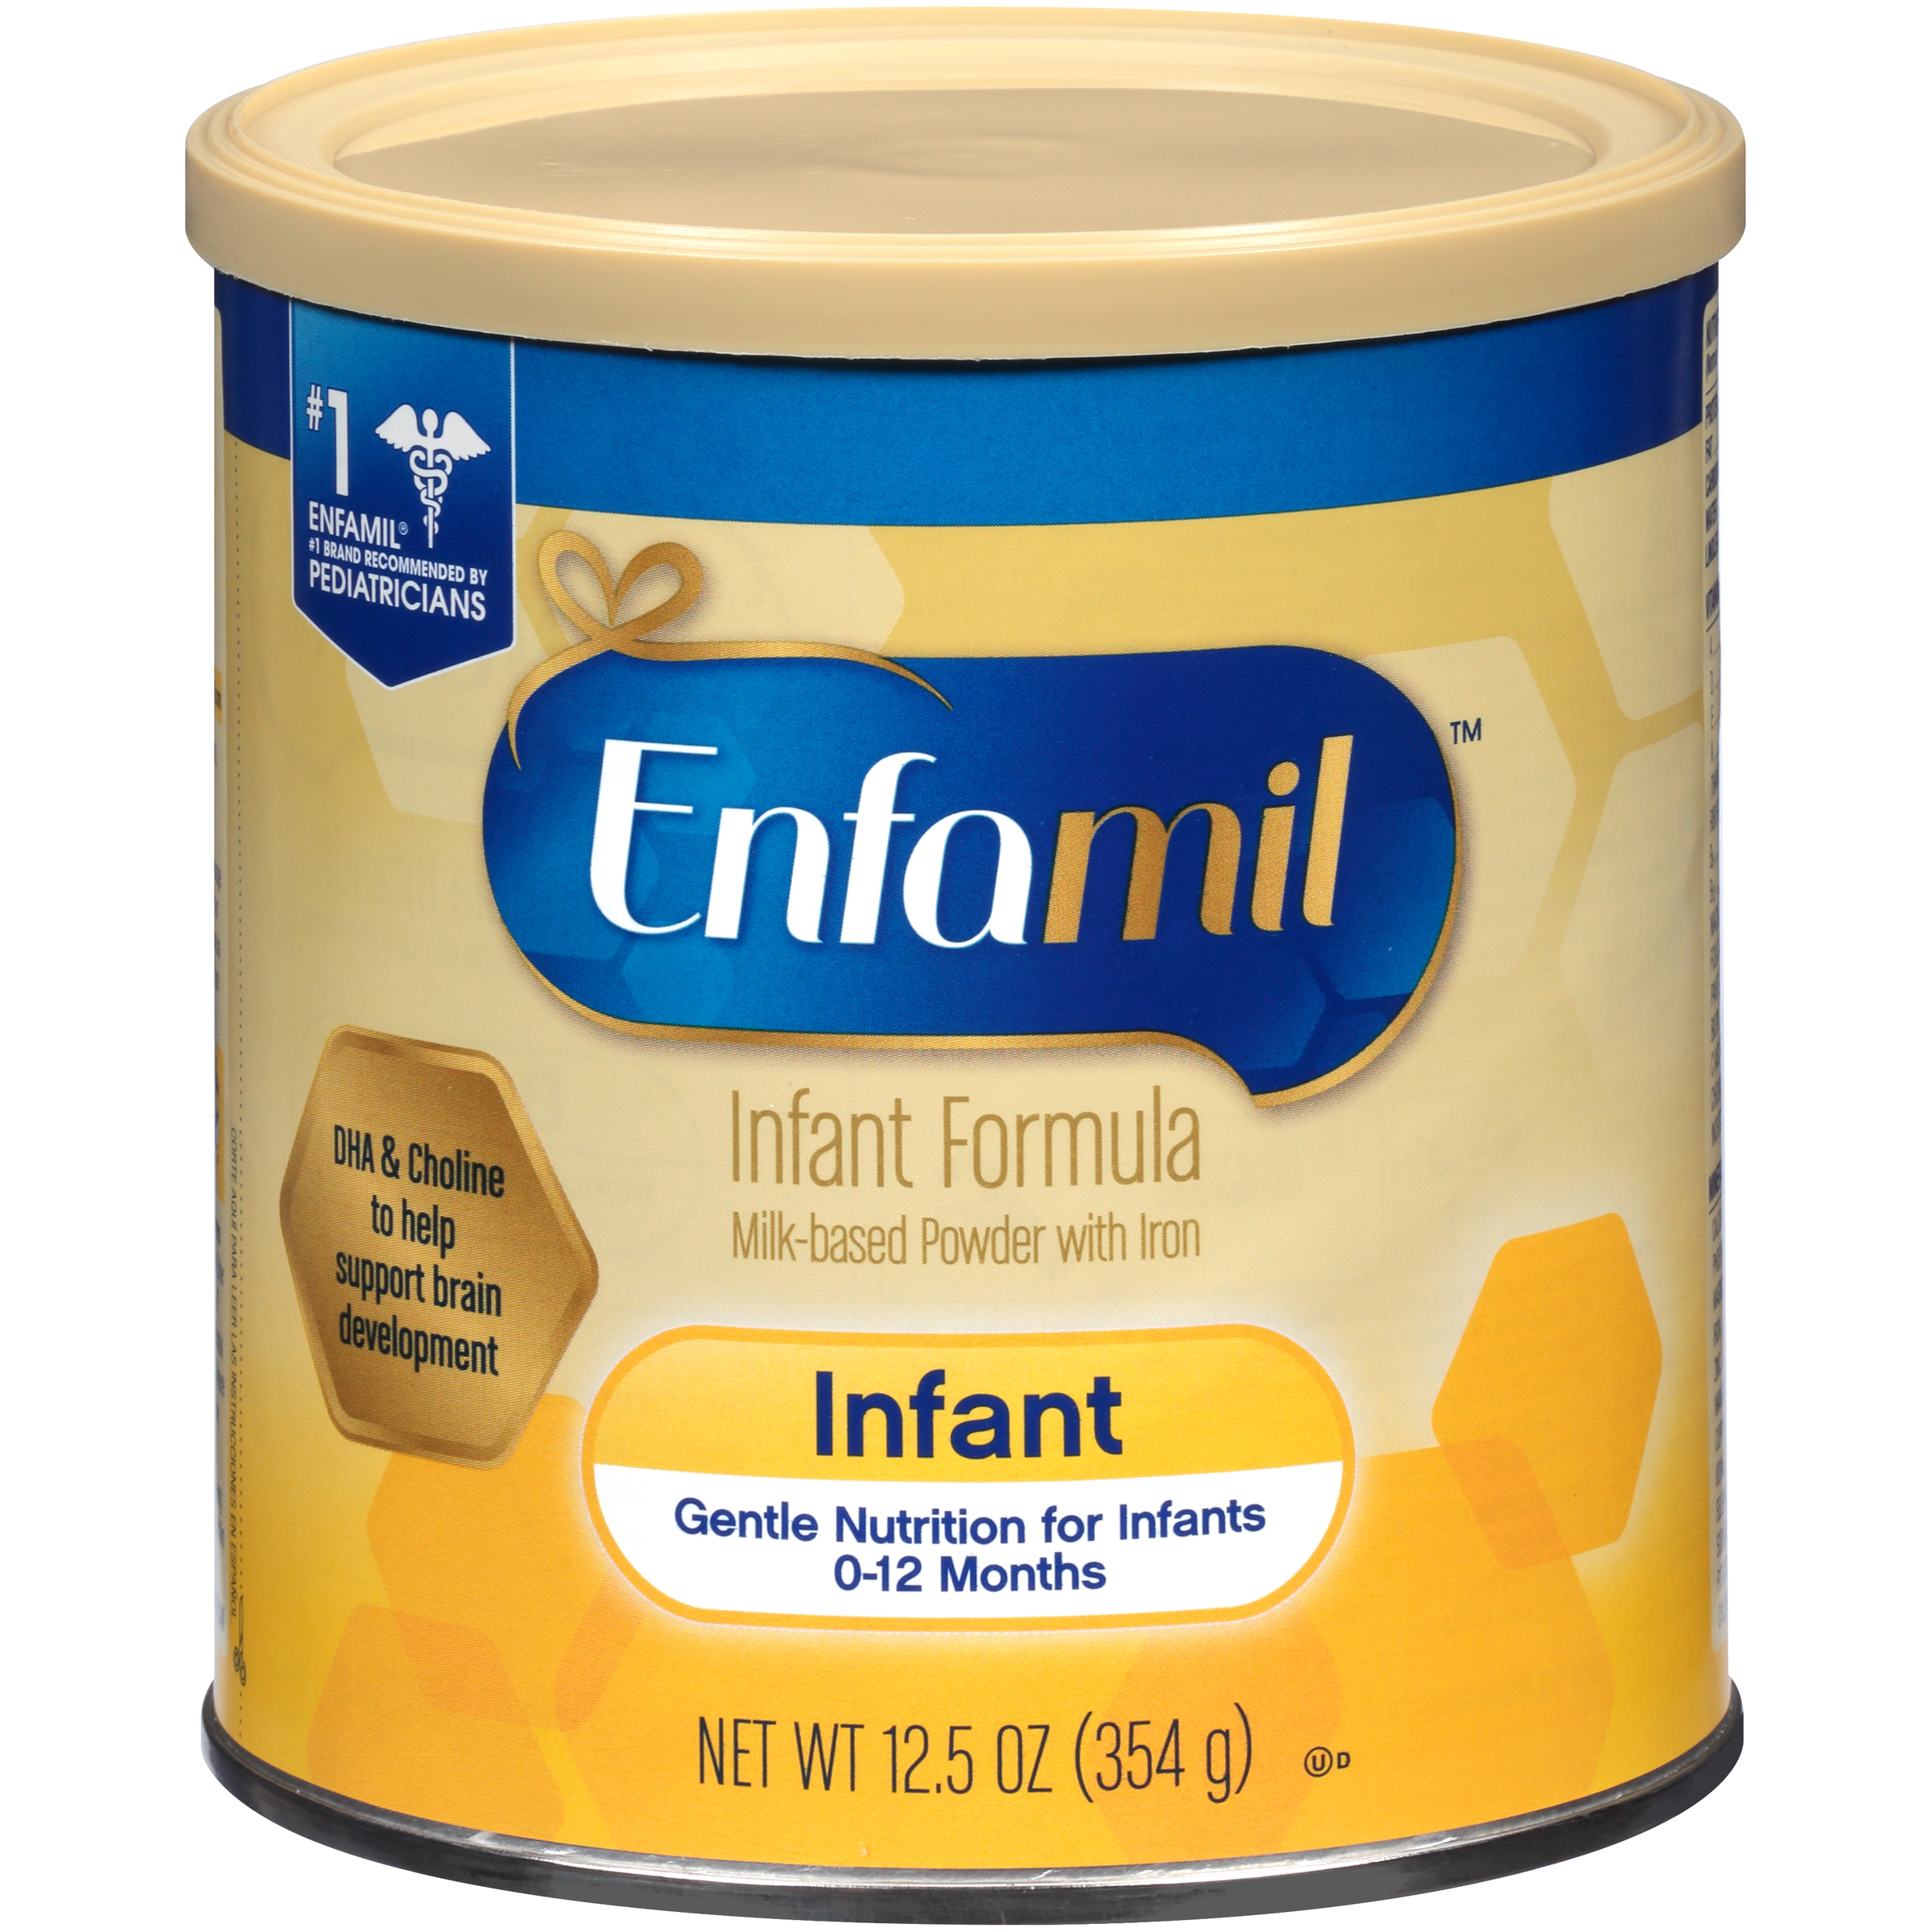 yellow can enfamil